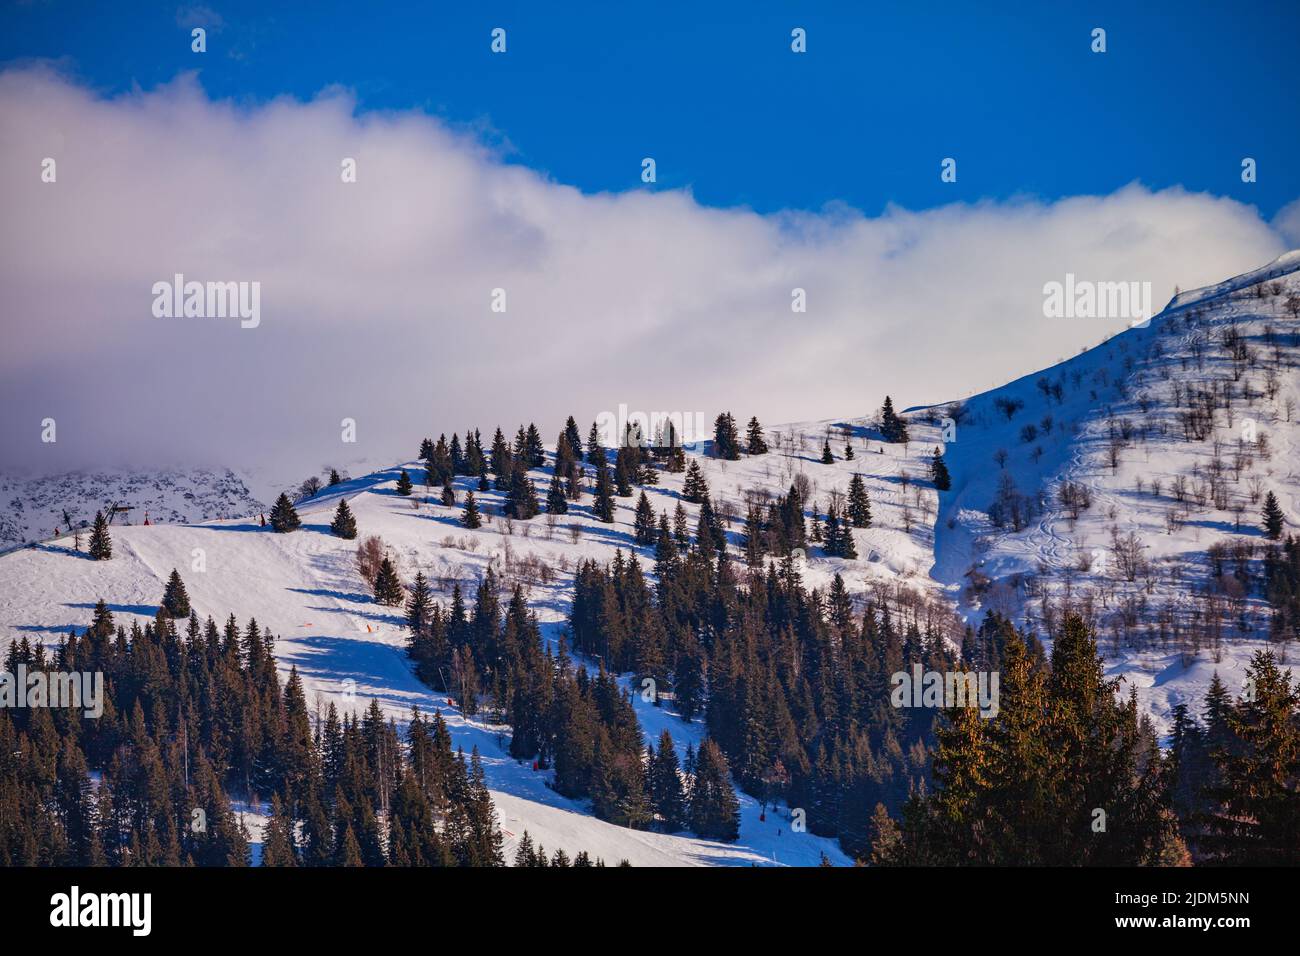 Alpine ski track on the hill covered in snow of Alps mountains Stock Photo